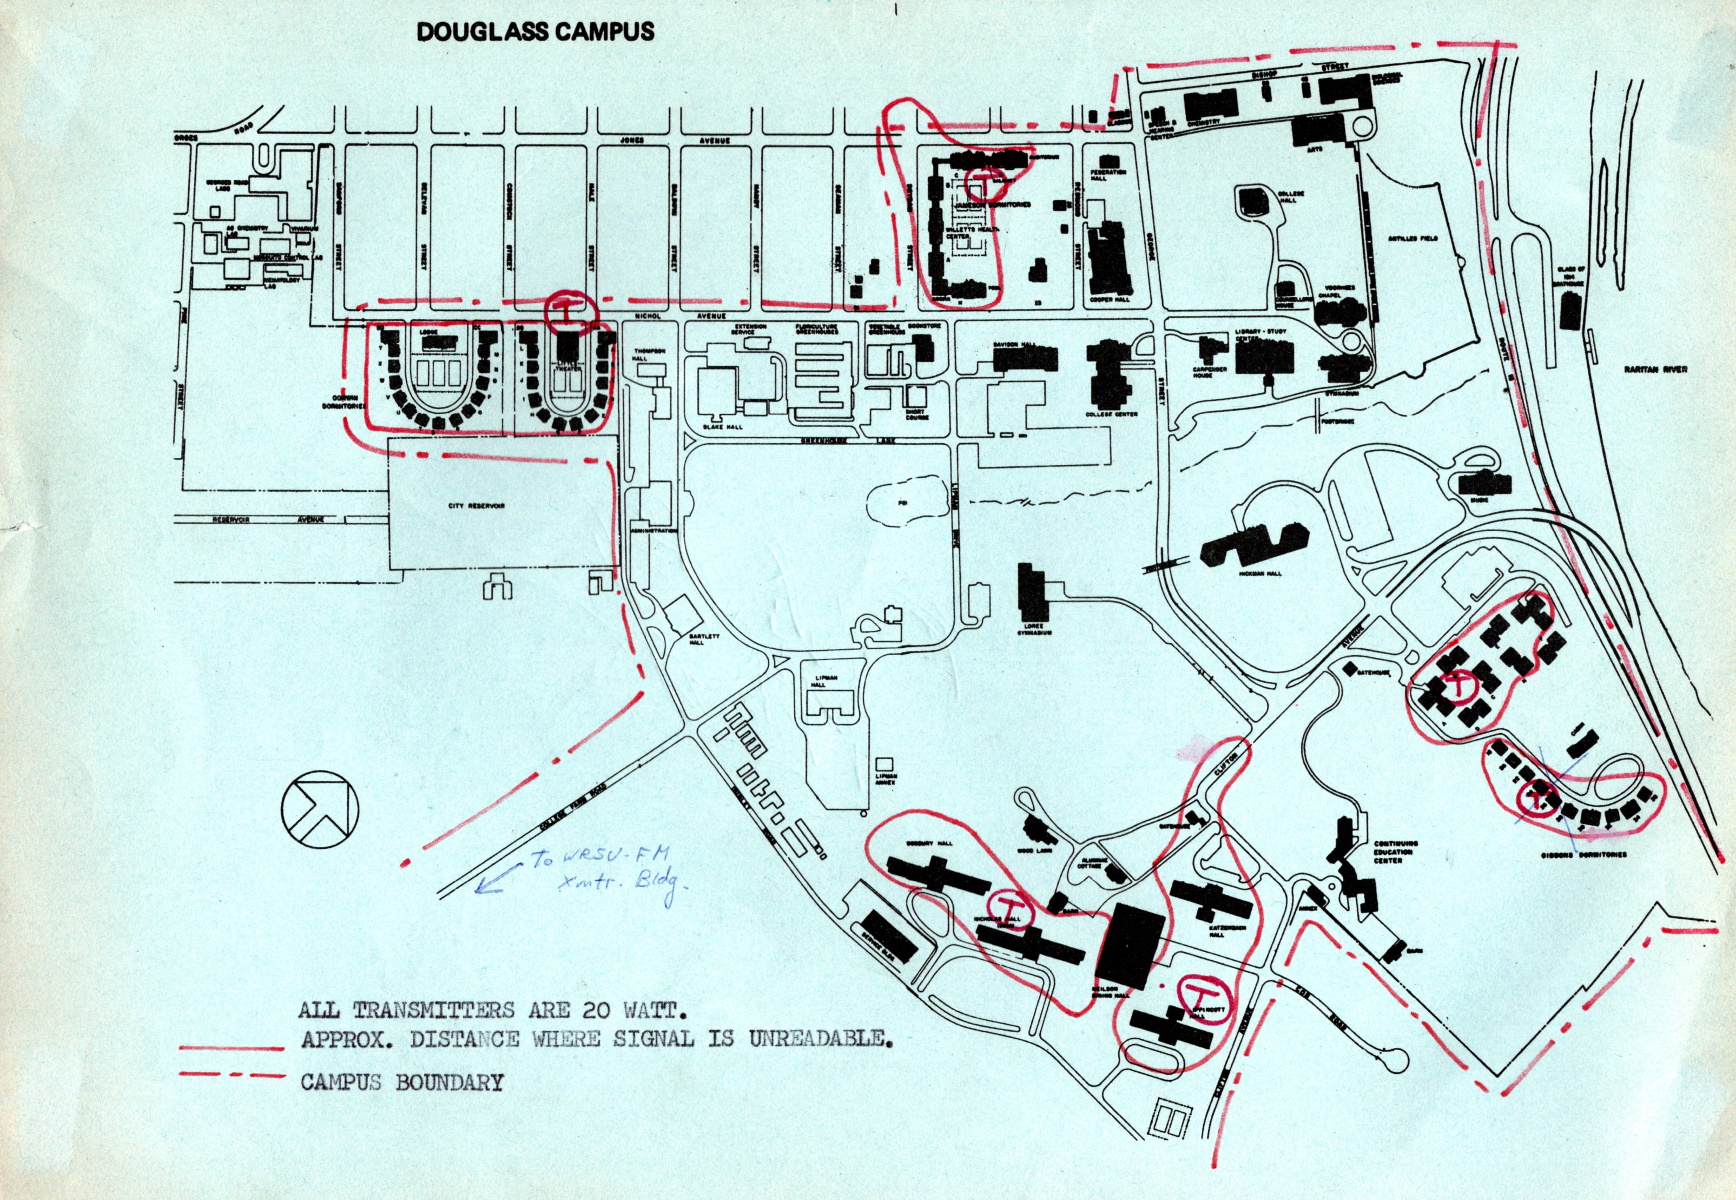 1975 A map of the WRSU-AM coverage at Douglass College